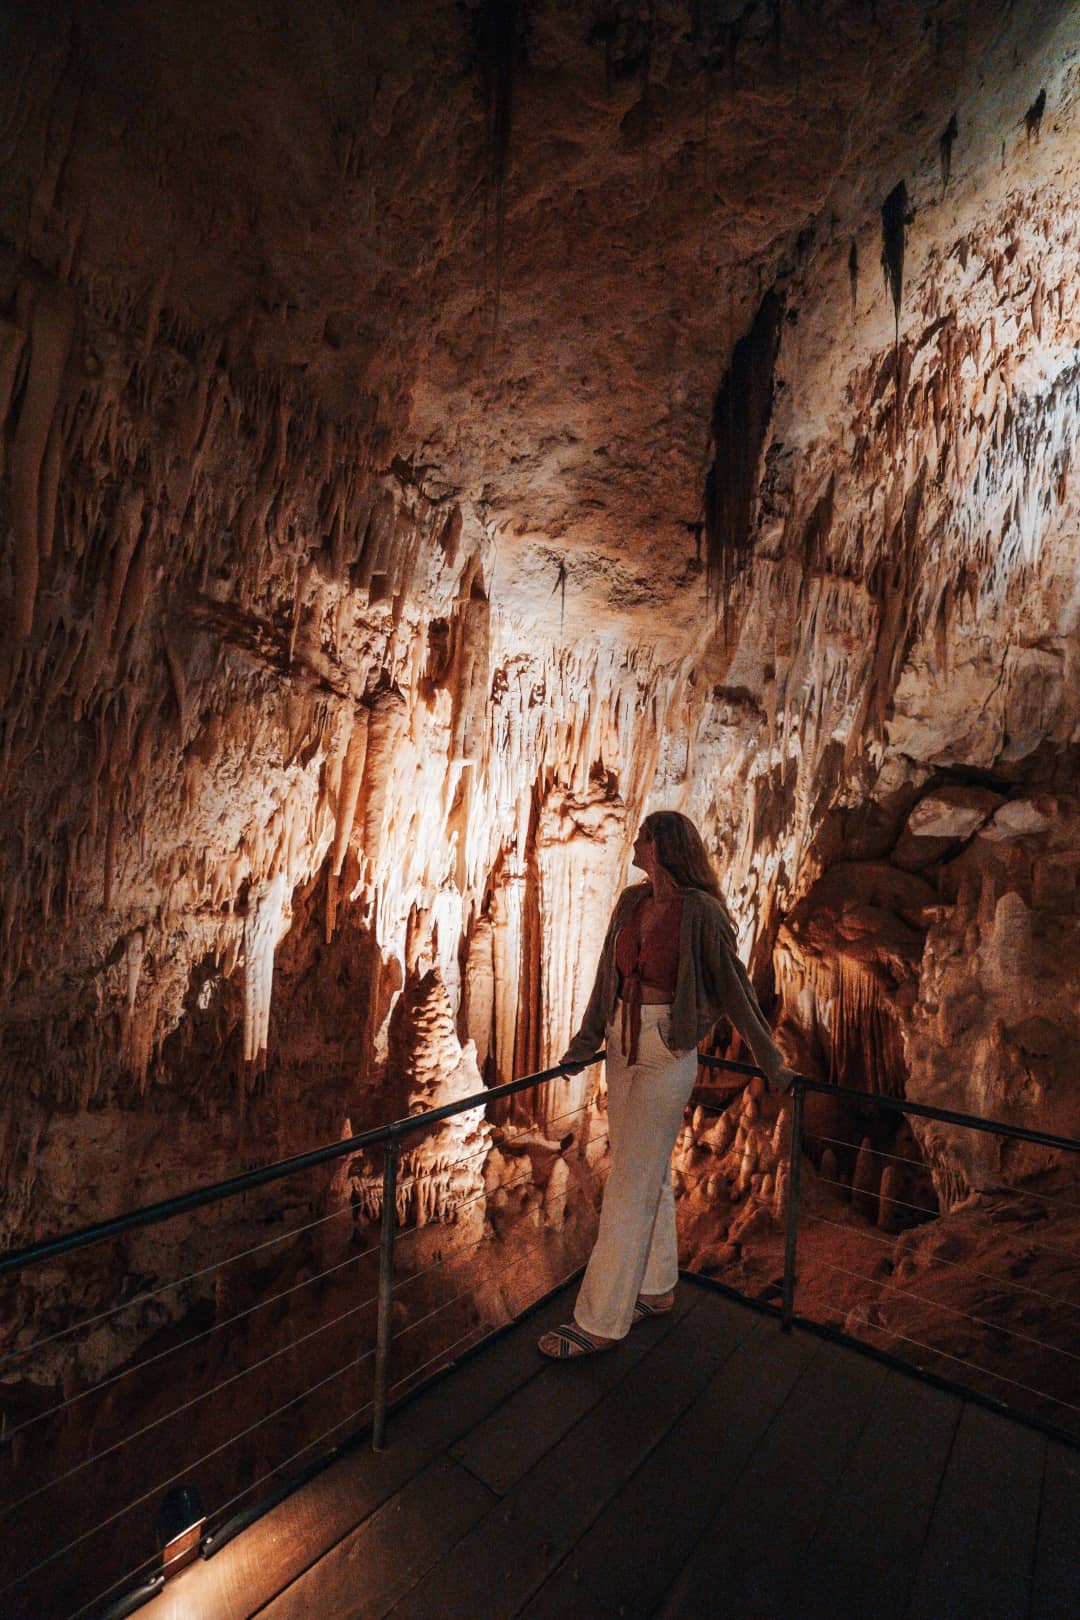 A woman stands on a wooden platform, looking out over the breathtaking view of an underground cave showing things to do in Margaret River, Western Australia